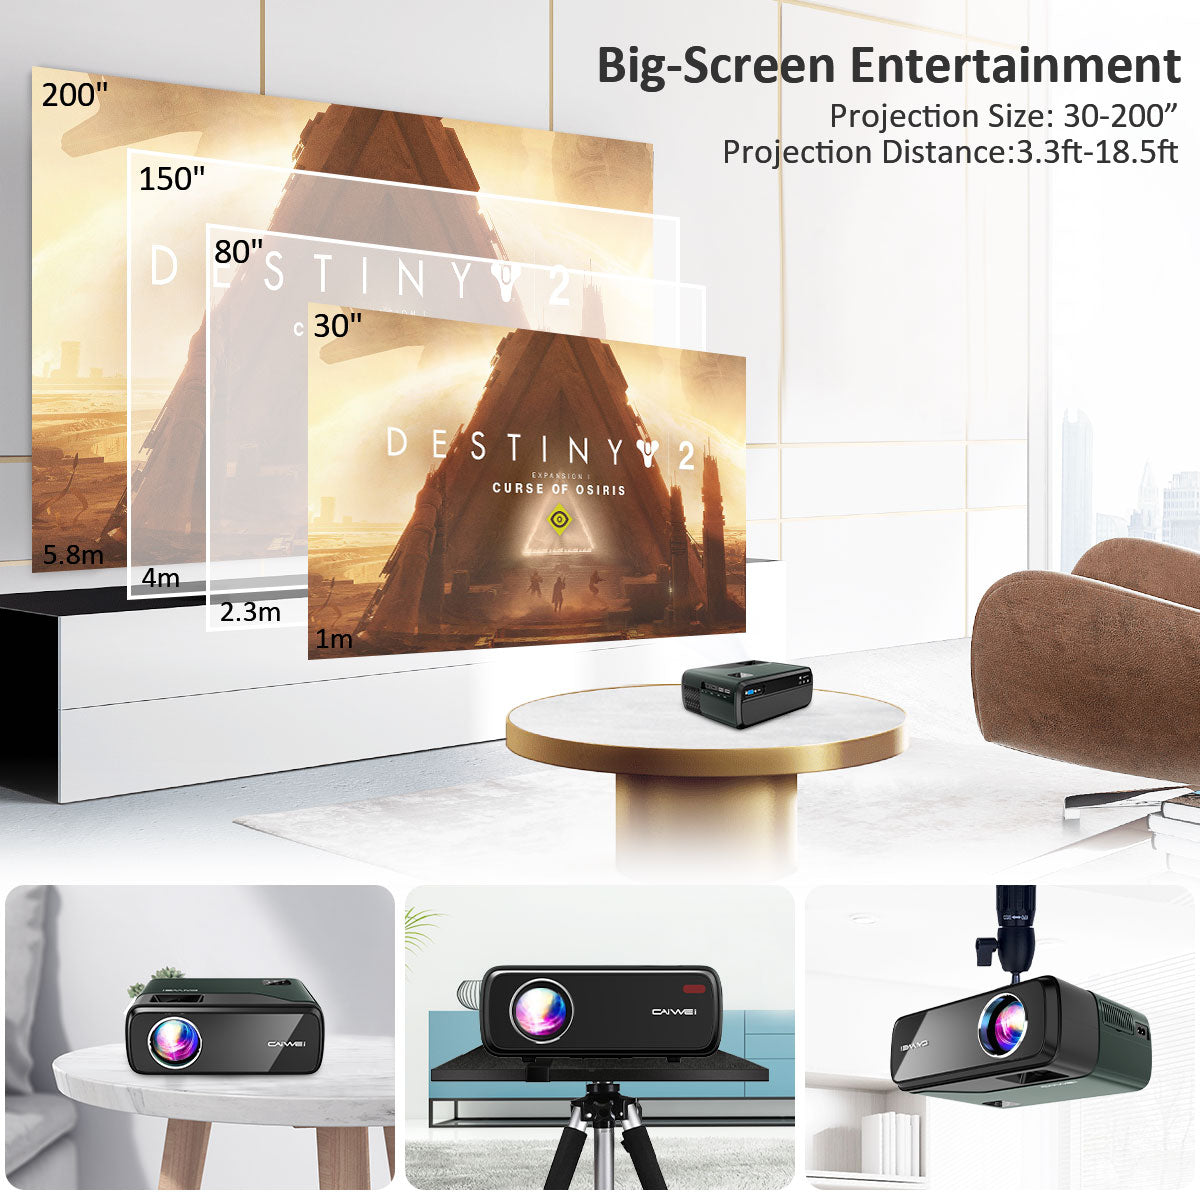 Portable 5G WiFi Bluetooth Projector 1080P Native, Android LED Full HD Moive Projector Wireless iOS Mirroring Support Massive Apps Bi-Bluetooth Outdoor/Indoor Proyector